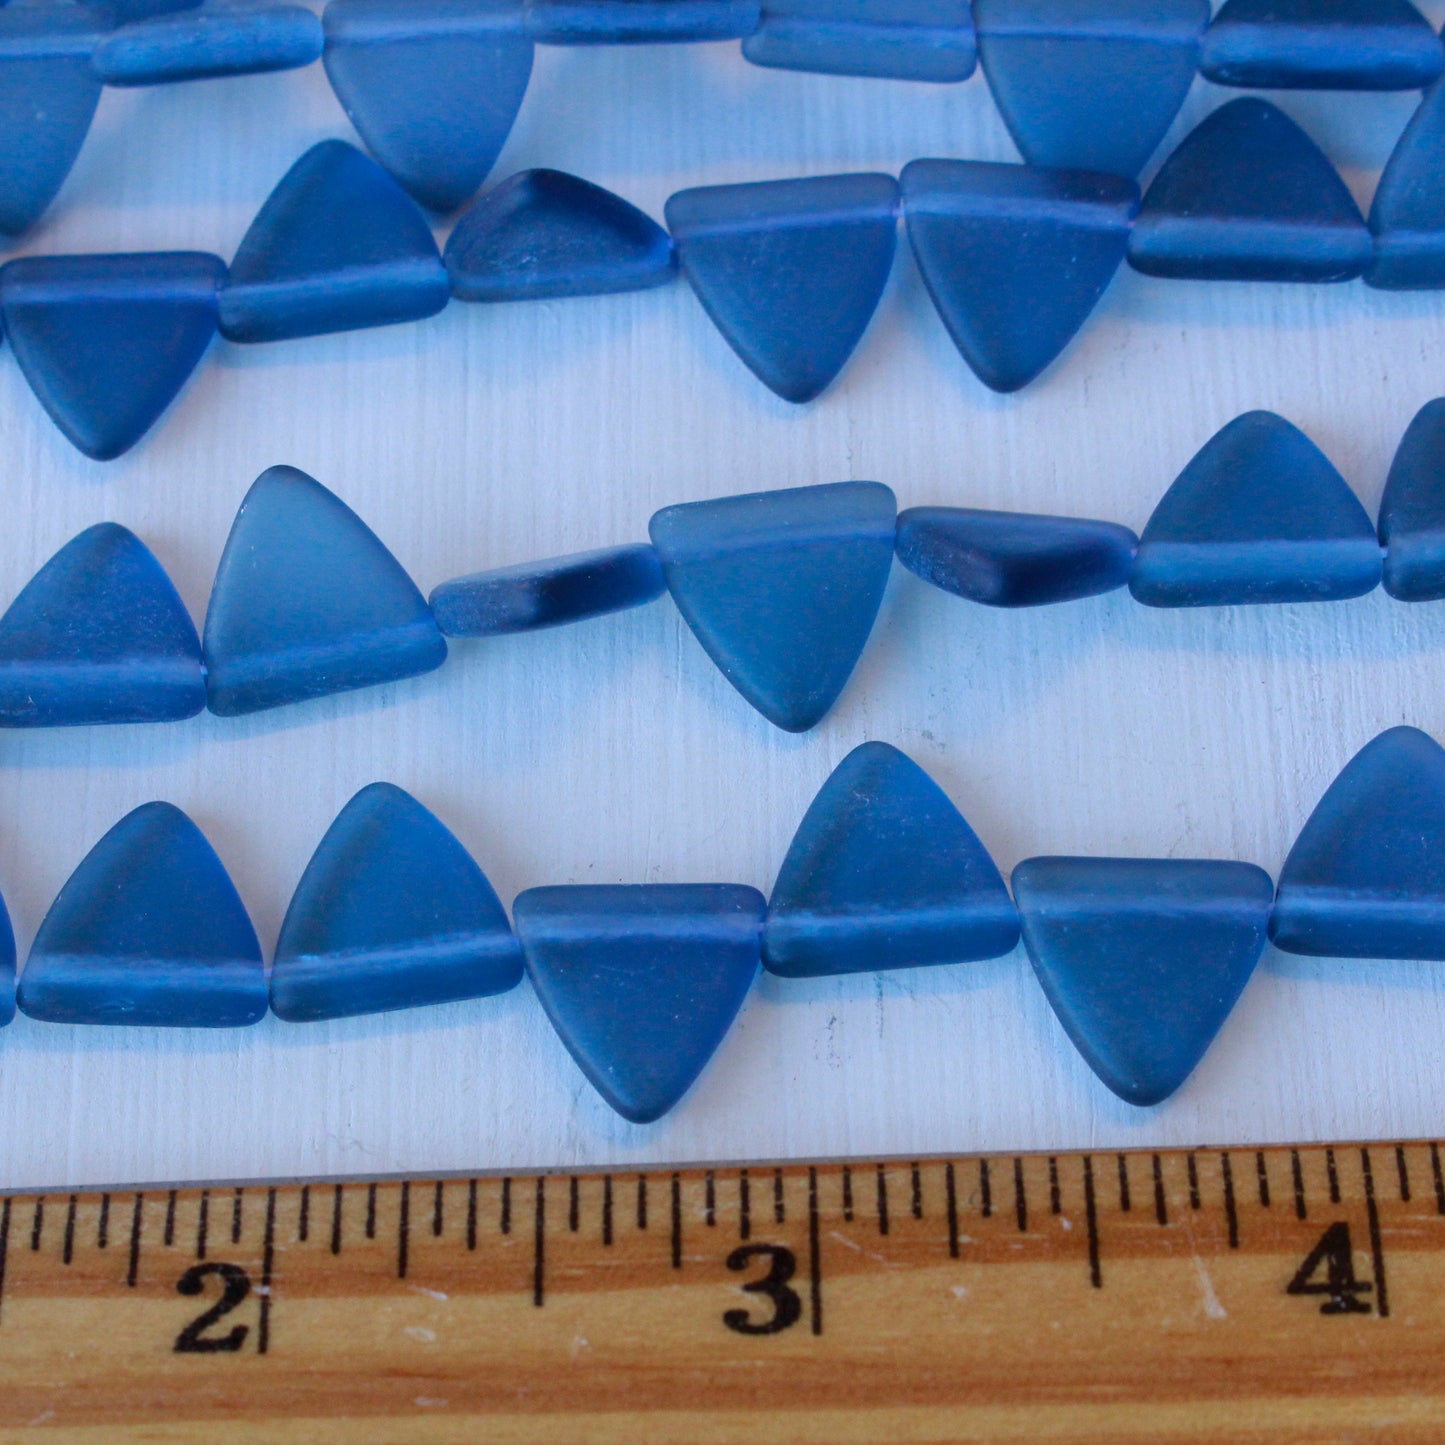 12mm Frosted Glass Triangle Drop Beads - Montana Blue - 30 Beads